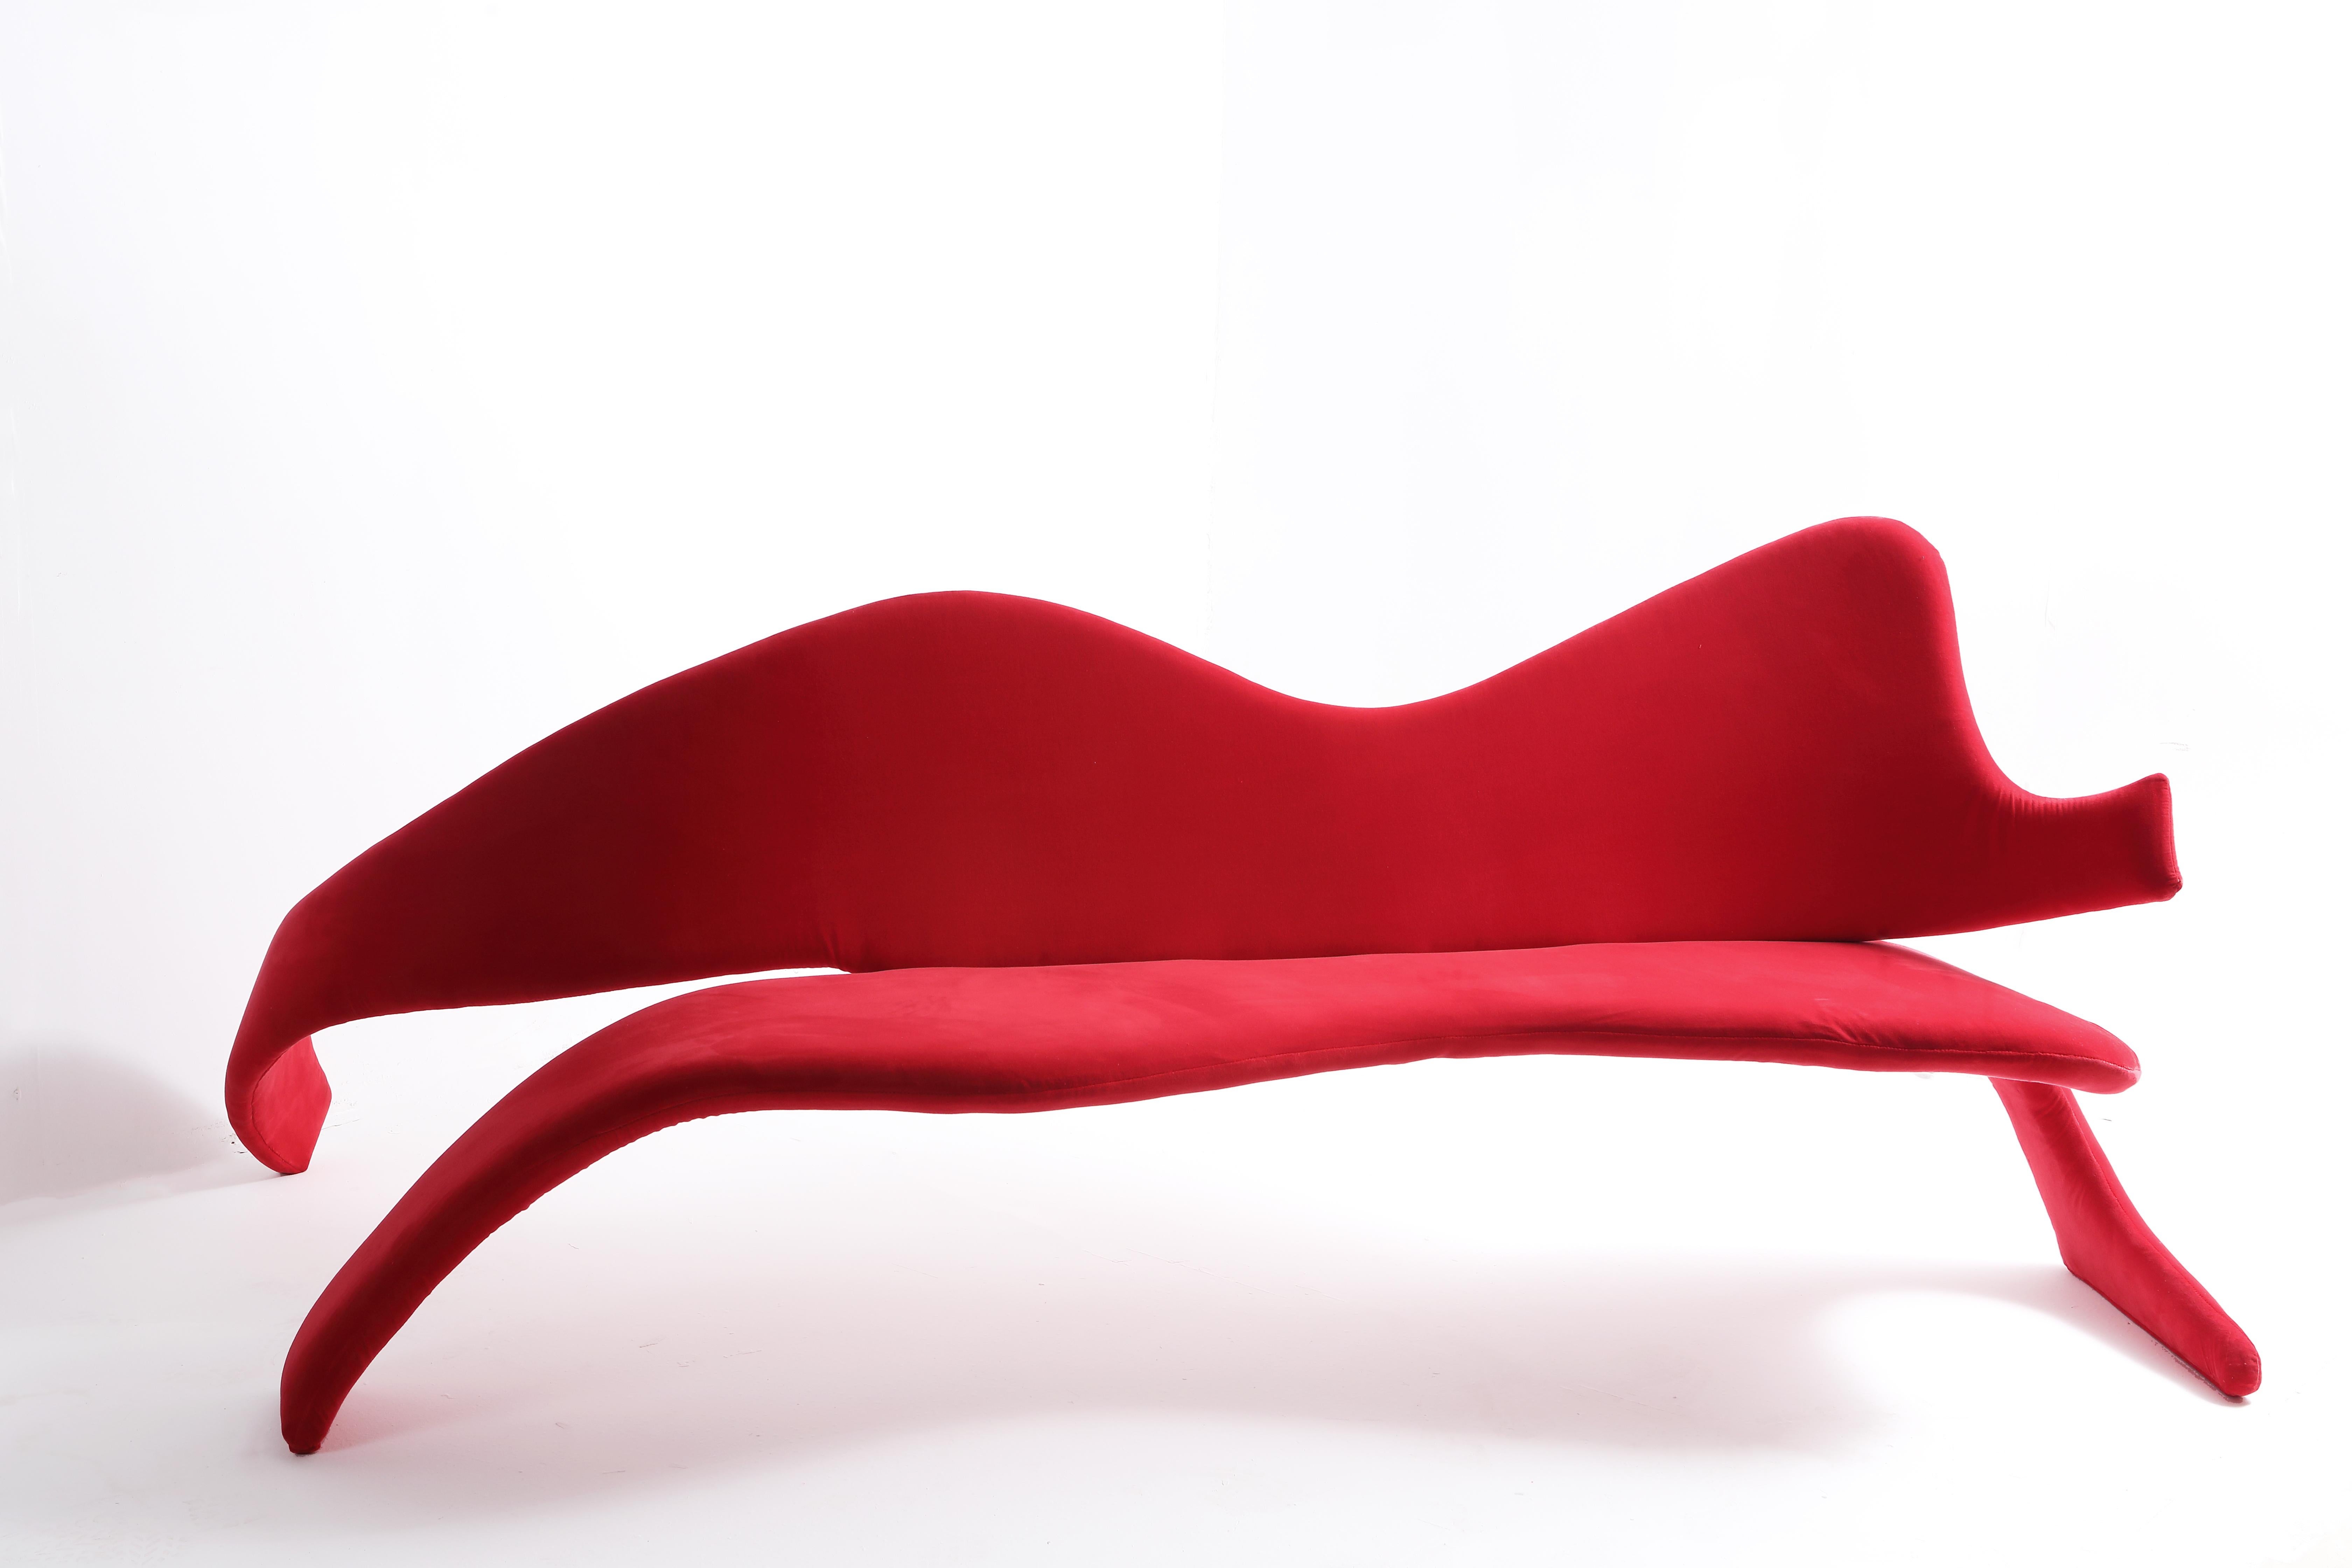 Afrodite bench by Mameluca
Material:Steel, Foam, Velvet
Dimensions: D240 x W100 x H90 cm

With reference to Paul Nacke’s theories about Narcissism, an attitude of a person who treats his own body in the same way as the body of a sexual object is